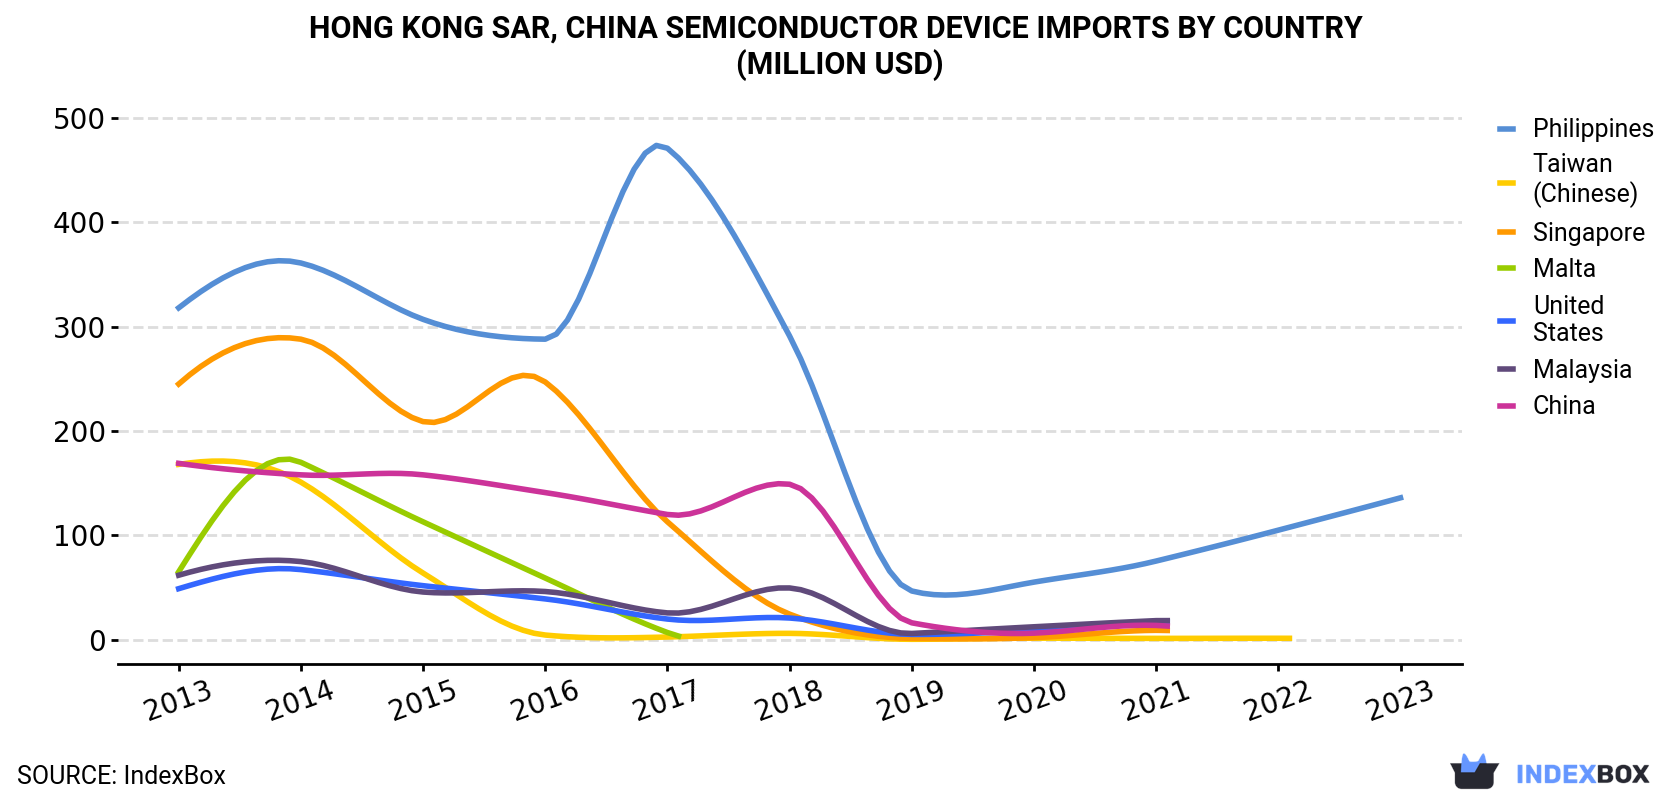 Hong Kong Semiconductor Device Imports By Country (Million USD)